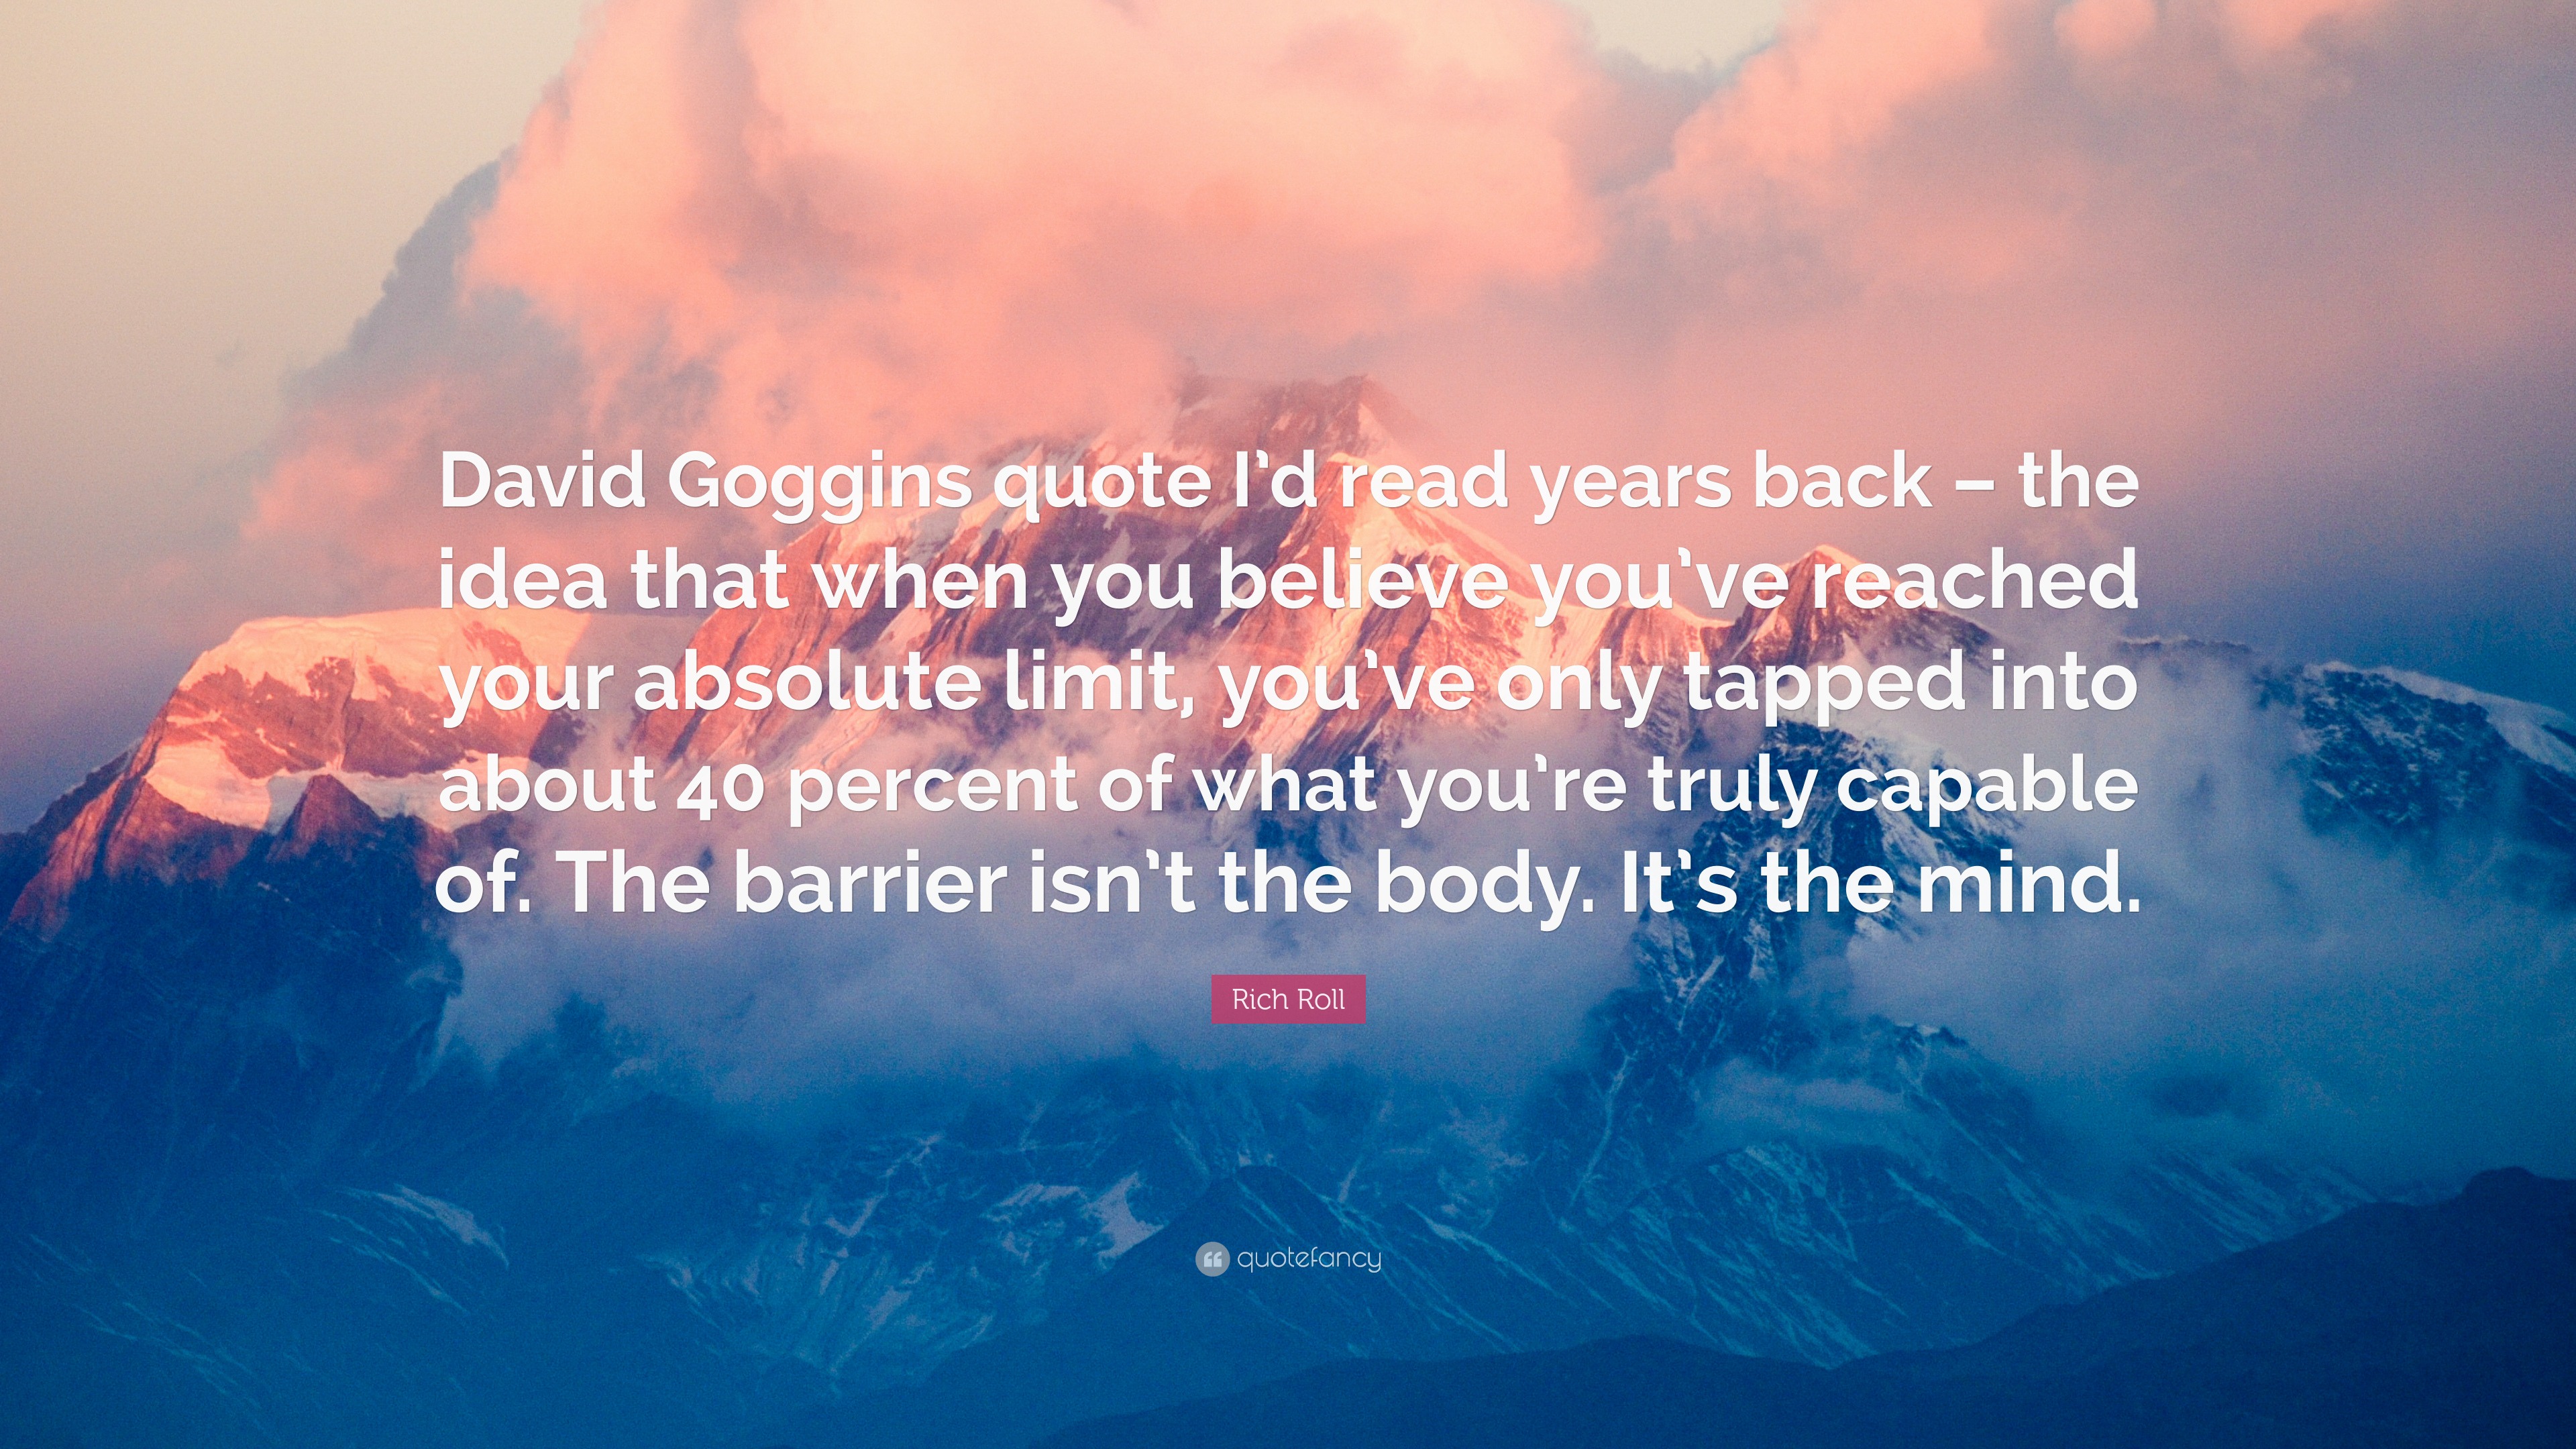 Rich Roll Quote: “David Goggins quote I'd read years back – the idea that  when you believe you've reached your absolute limit, you've only...”